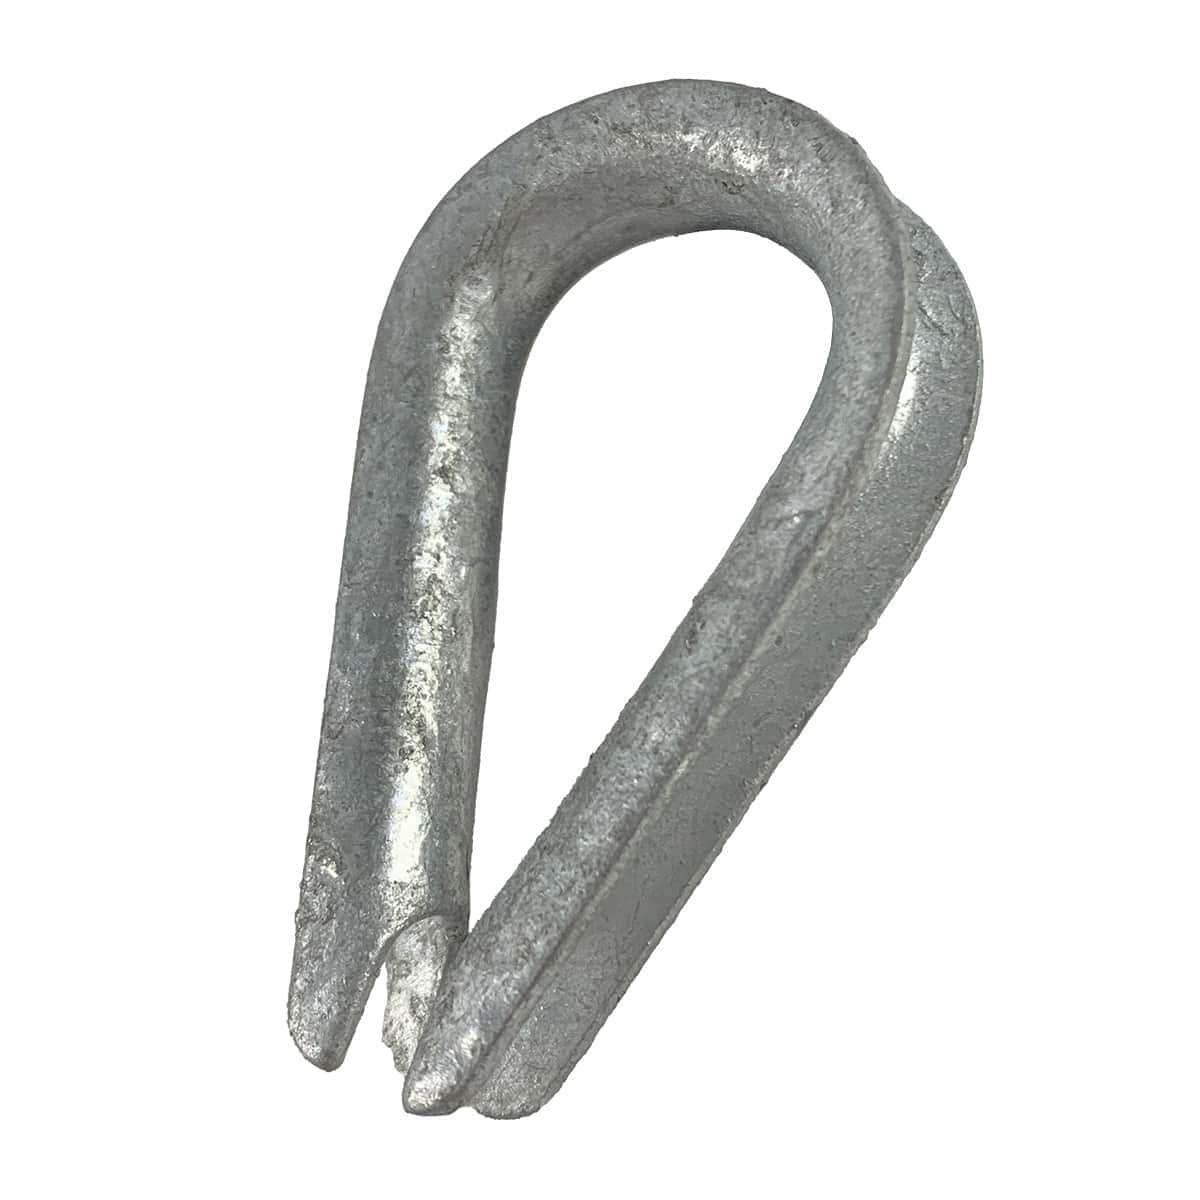 Wire Rope Thimbles - Skydog Rigging